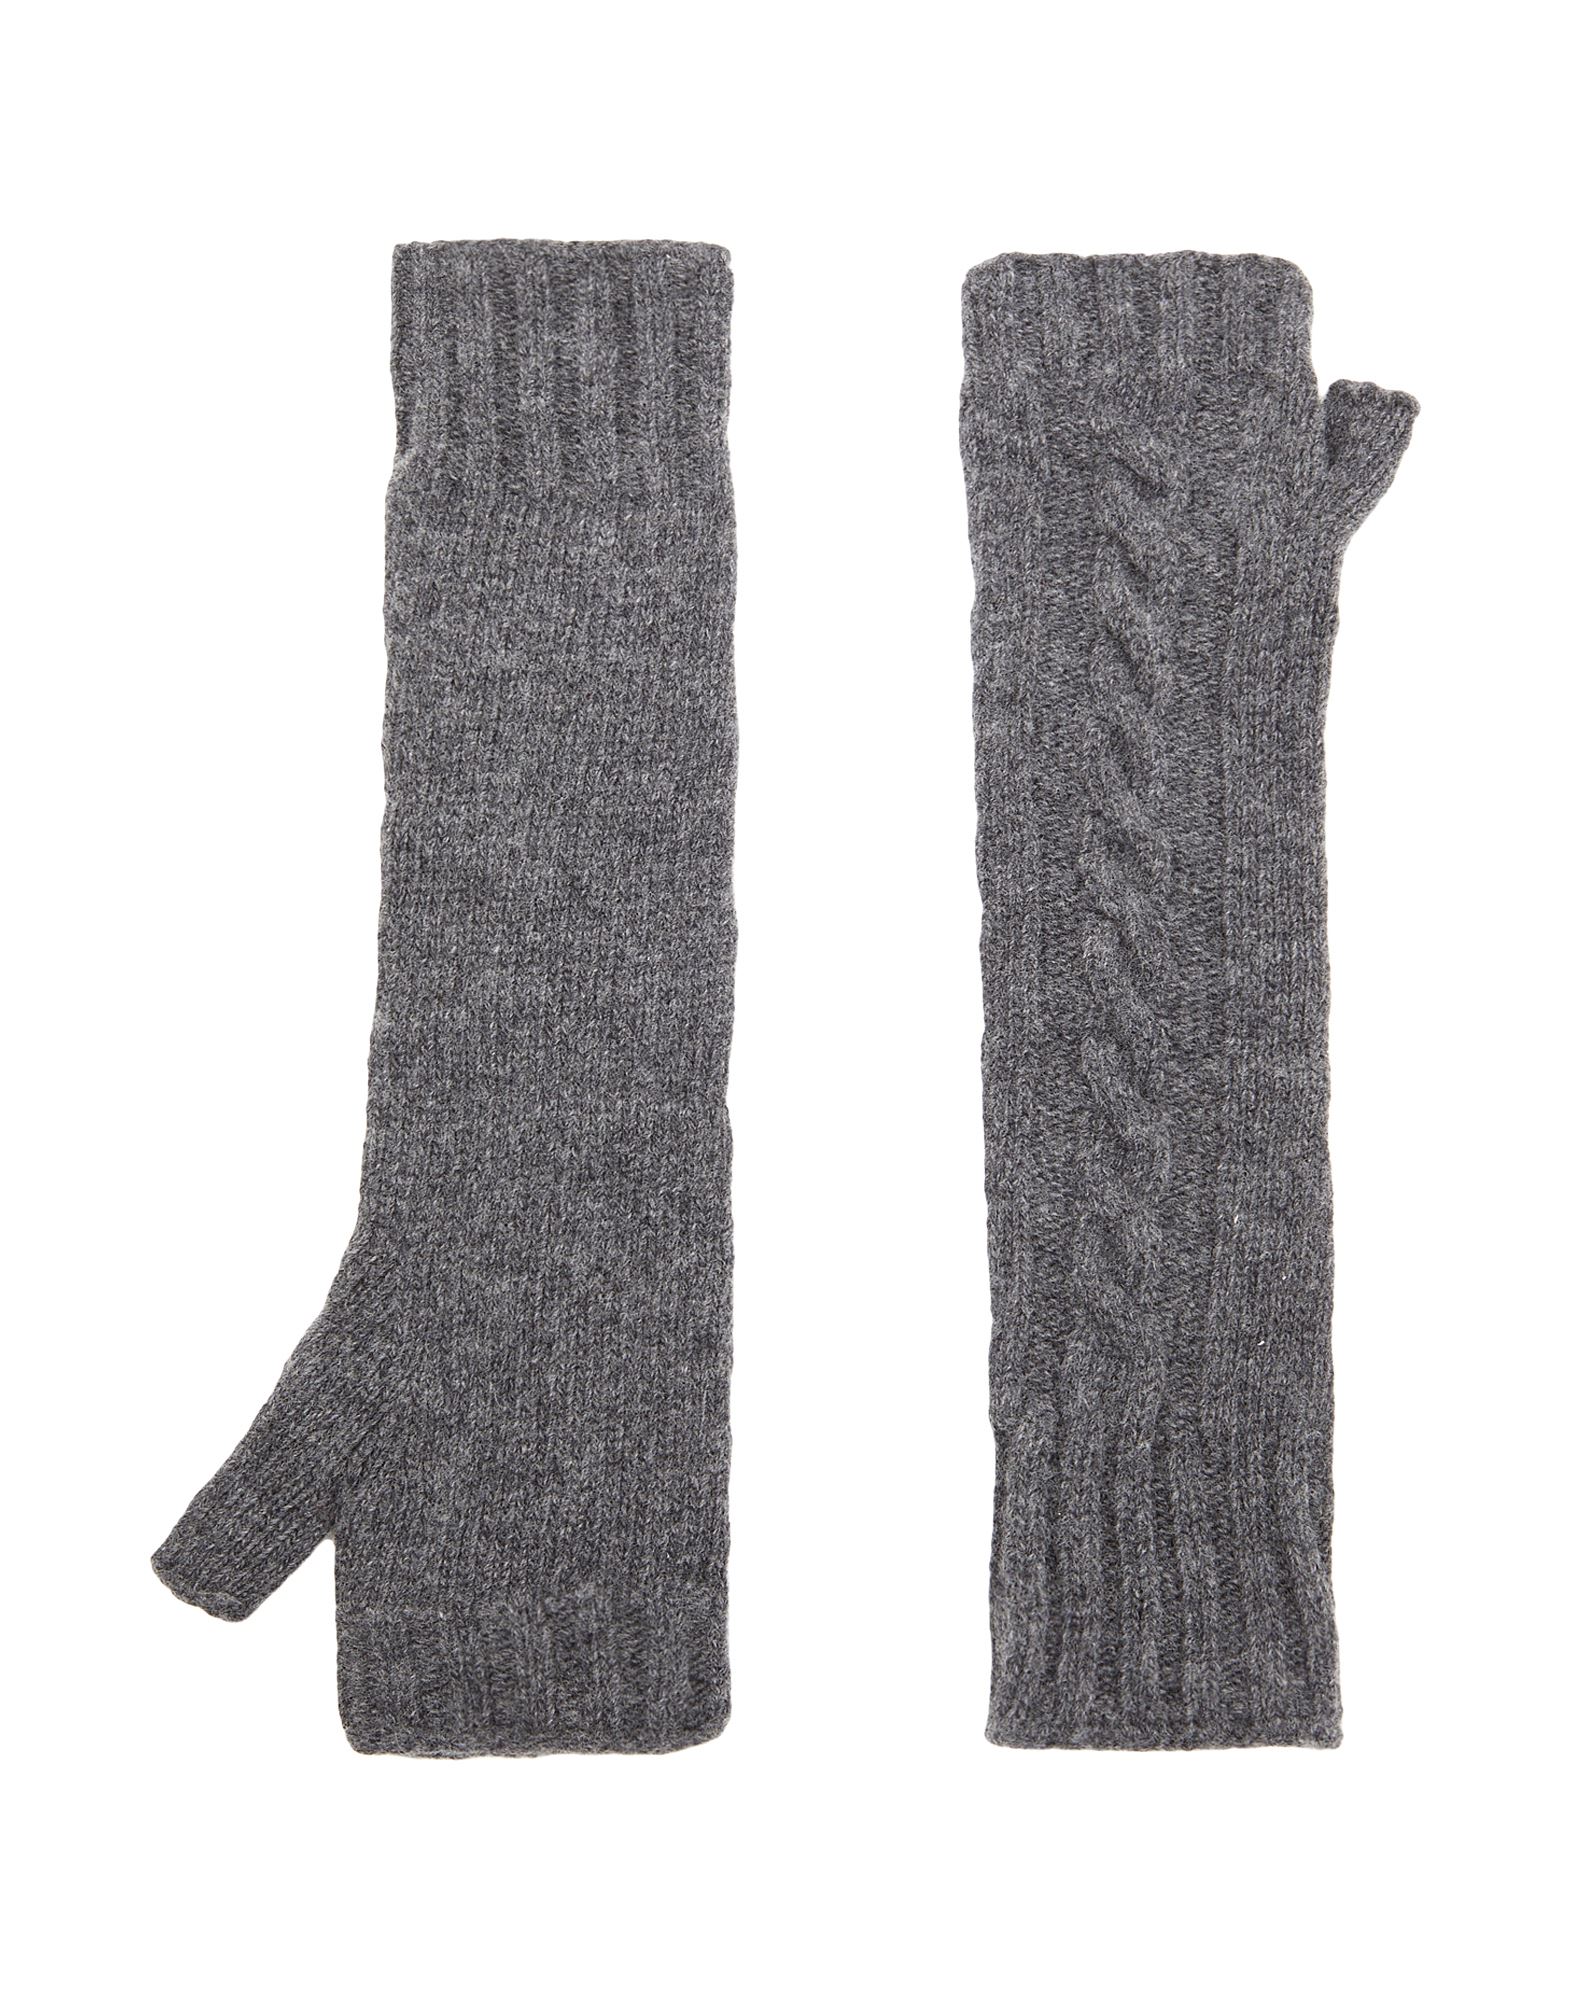 ԥ볫8 by YOOX ǥ  졼 one size ꥵ륦 100% RECYCLED EXTRAFINE WOOL FINGERLESS CABLE KNIT GLOVE